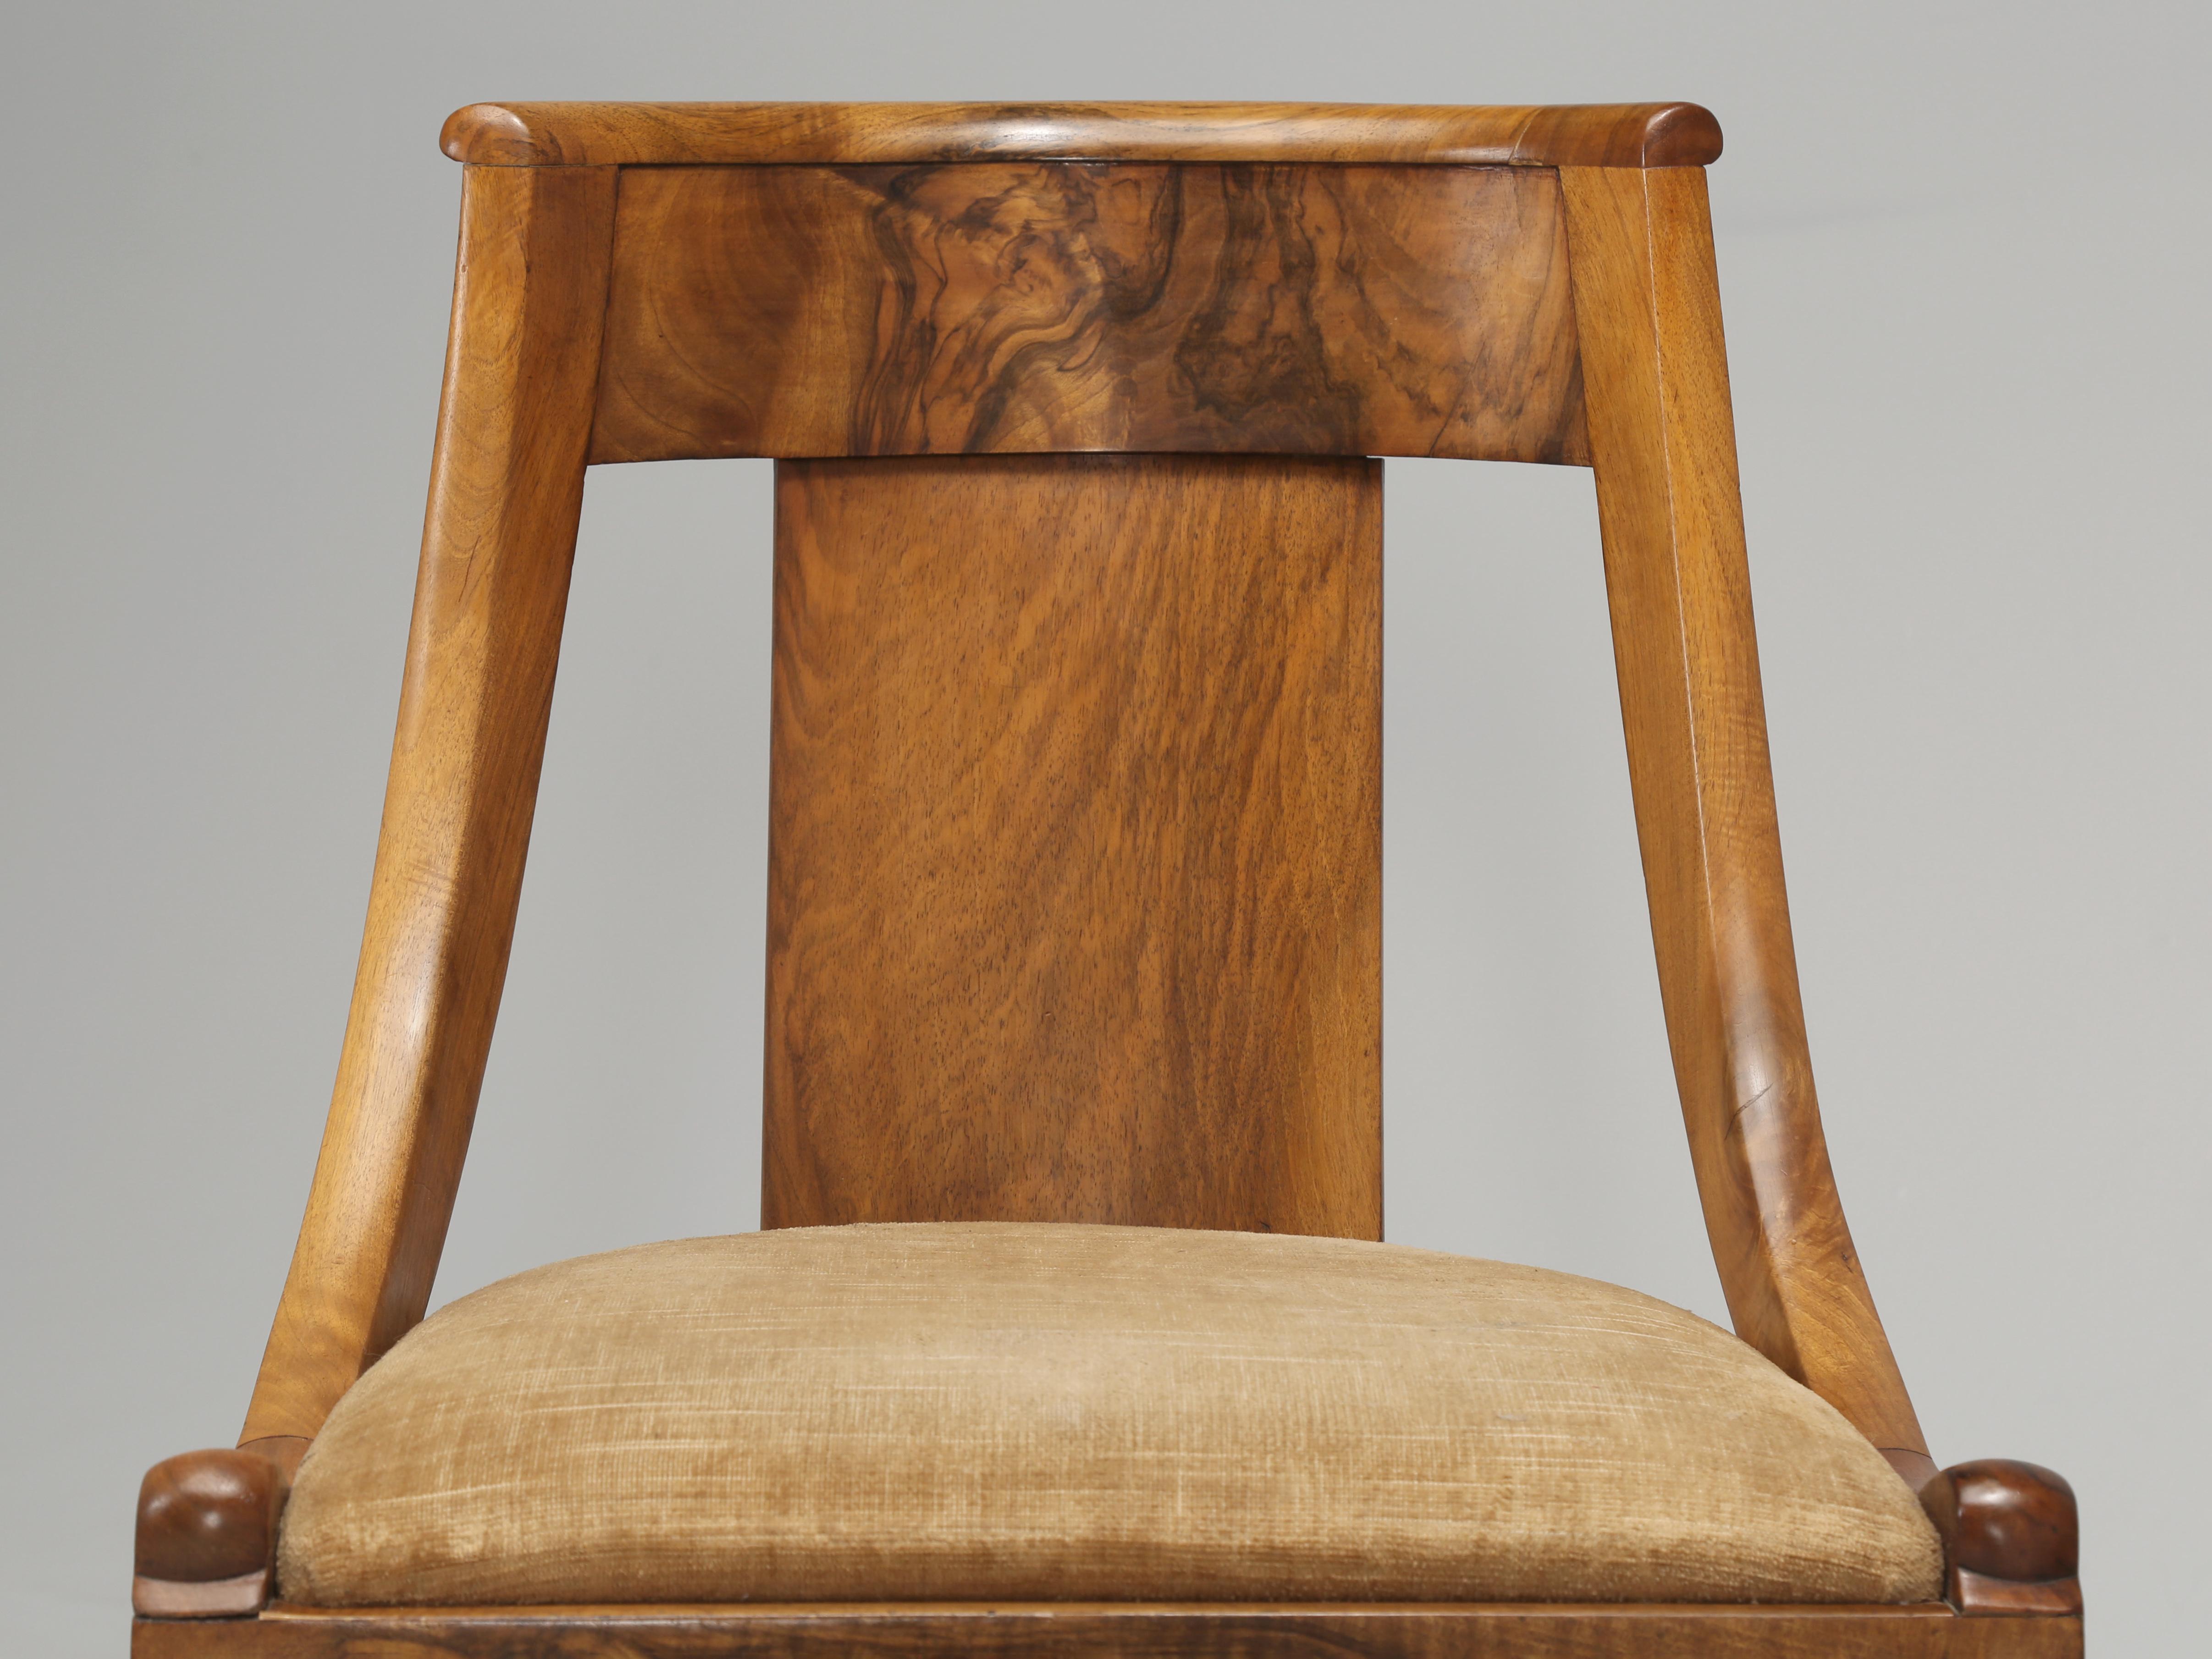 Magnificent pair of French Empire Style walnut barrel-back chairs, that was beautifully restored in France many years ago. The grain of the French walnut on this pair of barrel-back chairs is truly exquisite and quite rare to find French walnut this